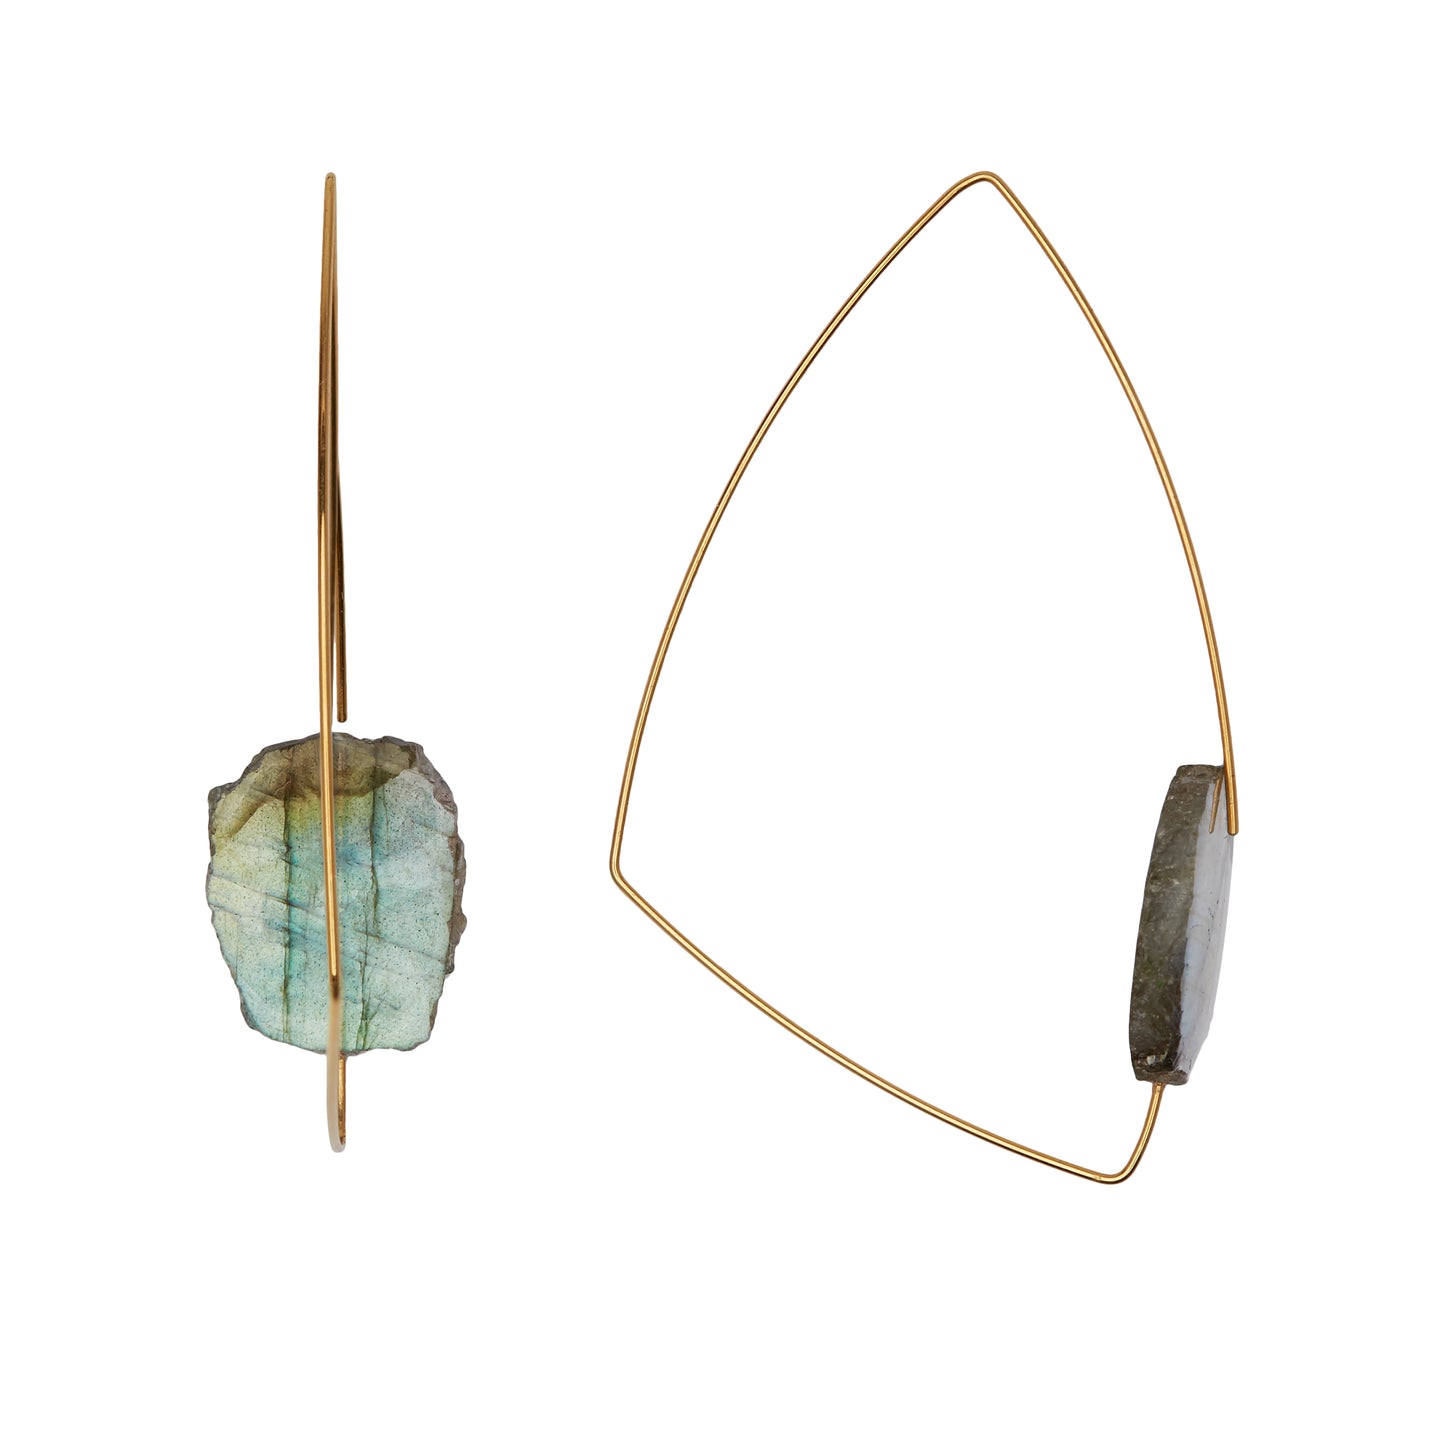 Large Triangle Earrings with Labradorite